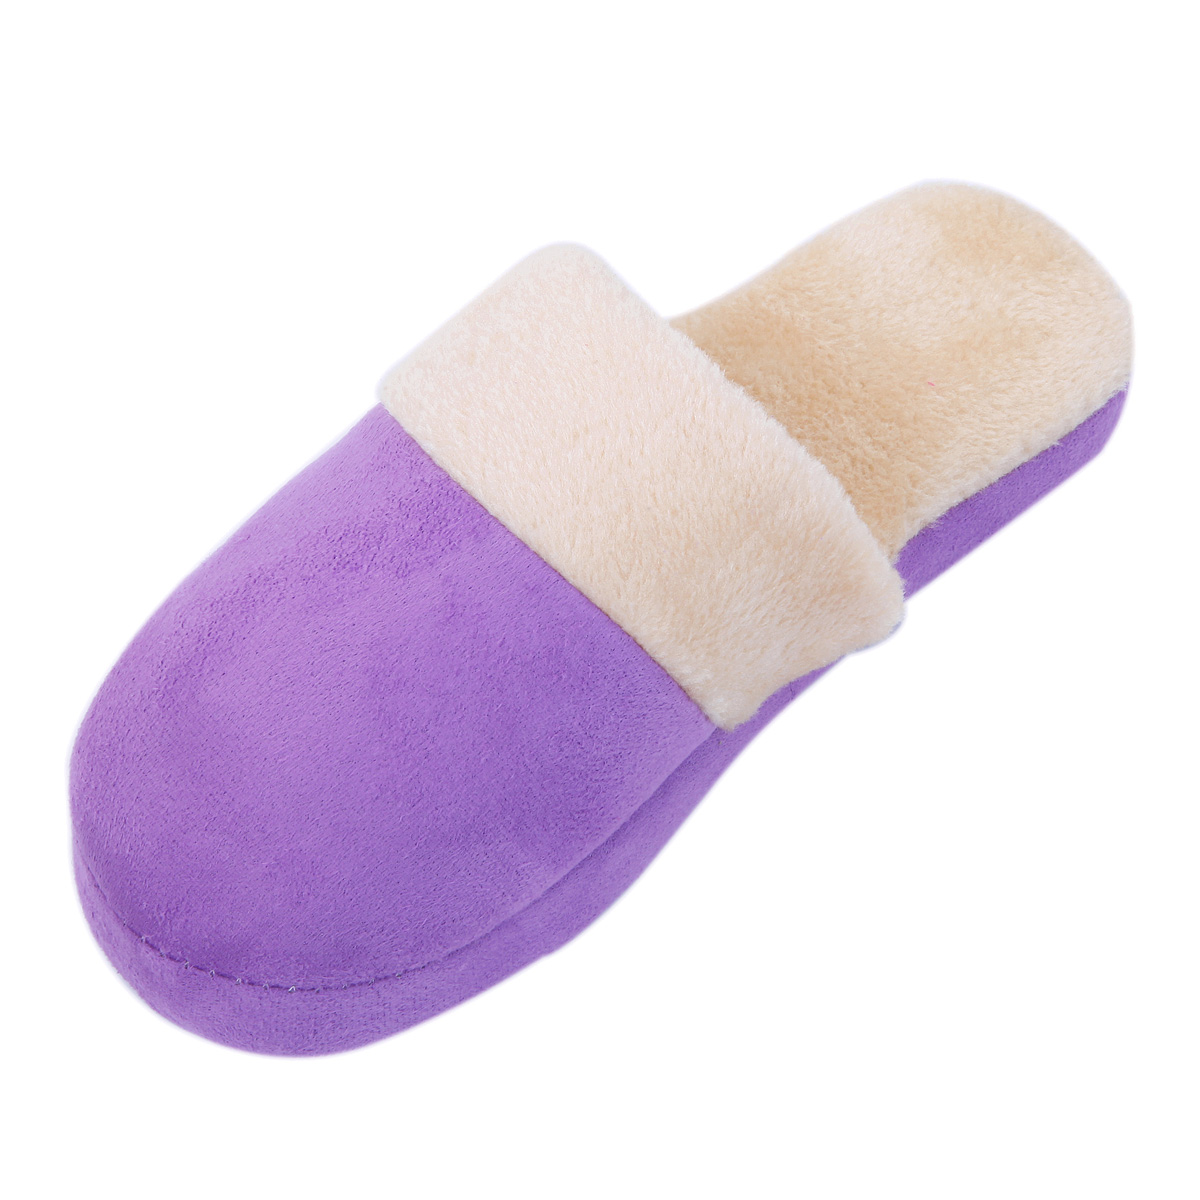 Shoes & Slippers :: Purple Plush House Slippers with Fur Trim